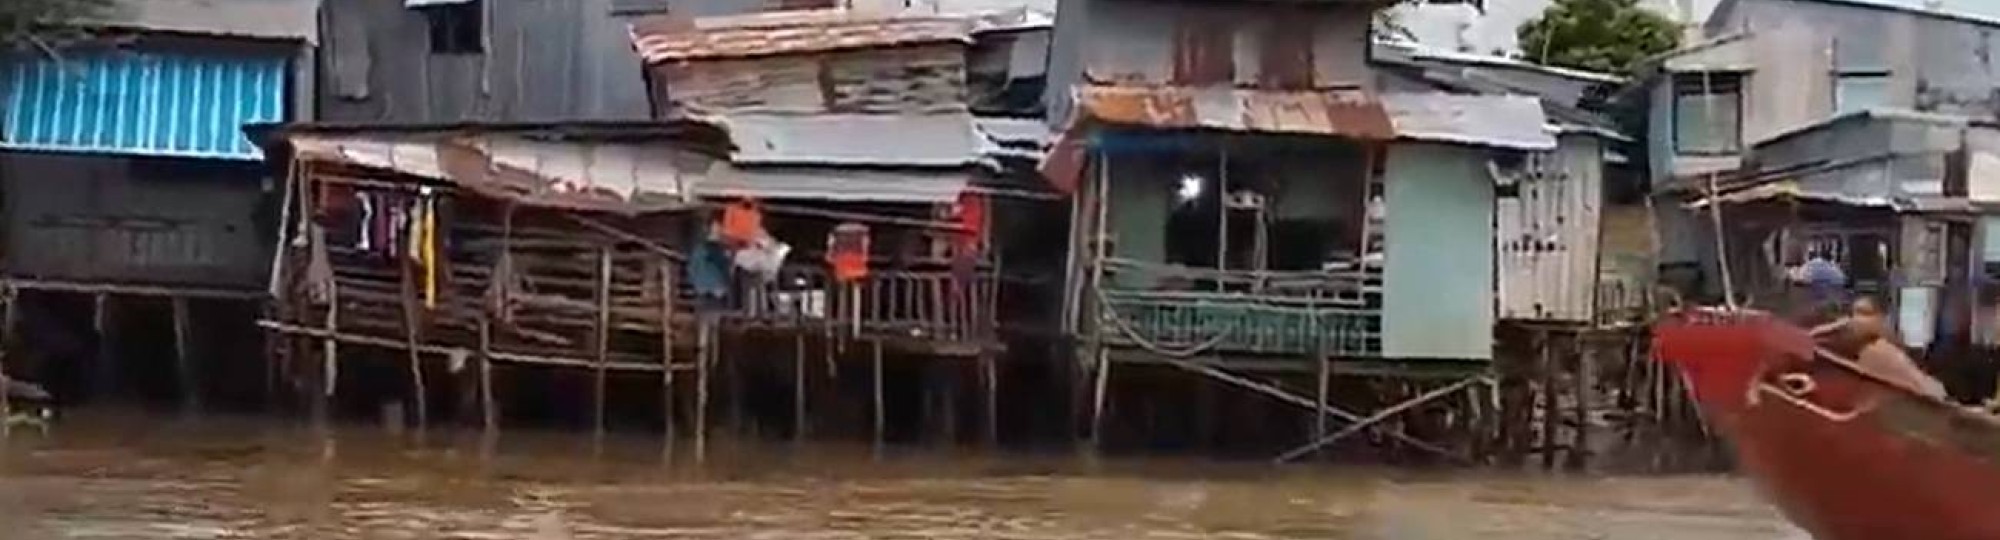 still video recycled plastic for flood resilience mekong delta srm